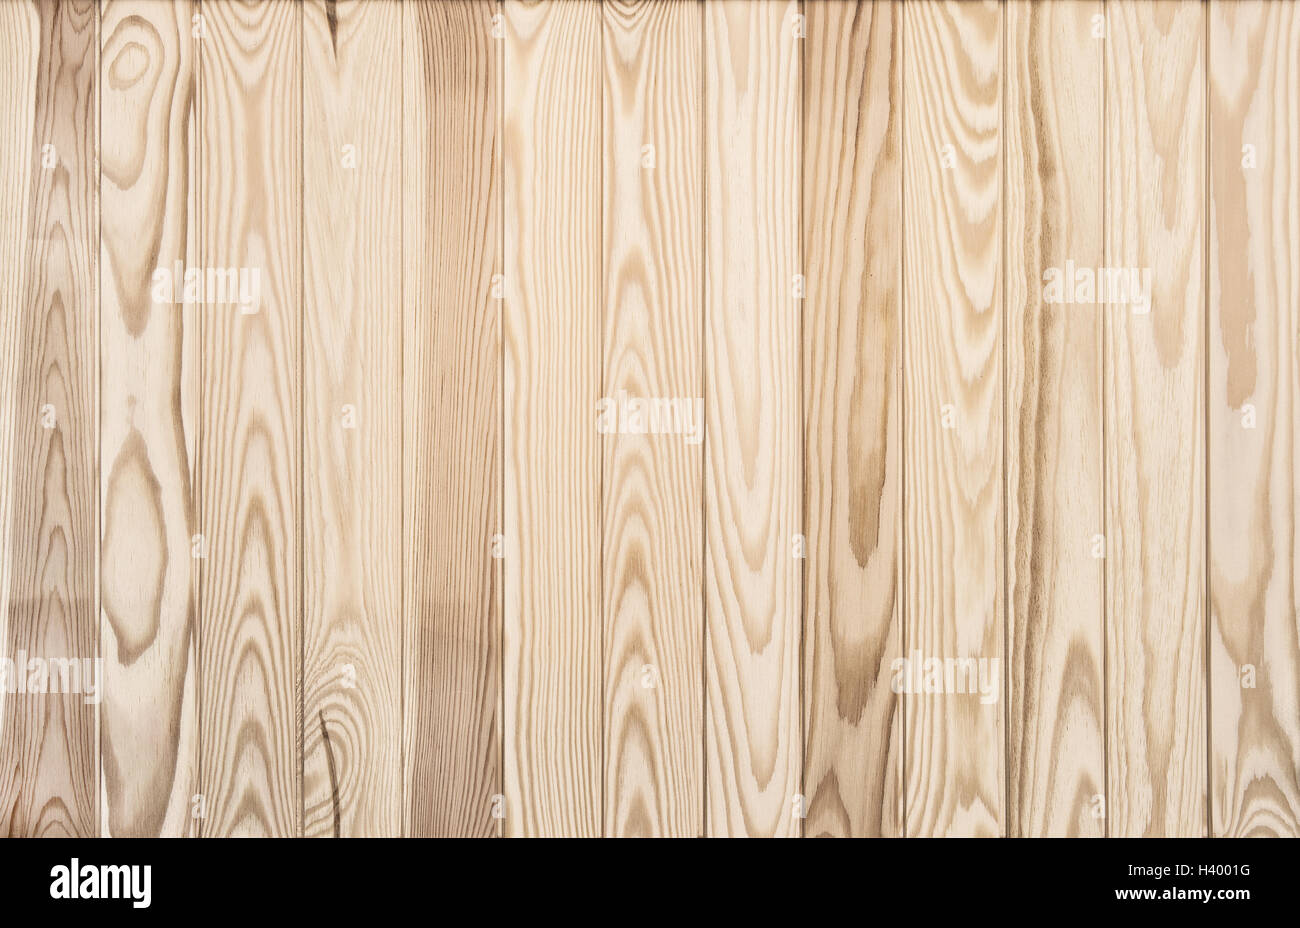 Wooden texture with natural pine wood pattern. Abstract background Stock Photo